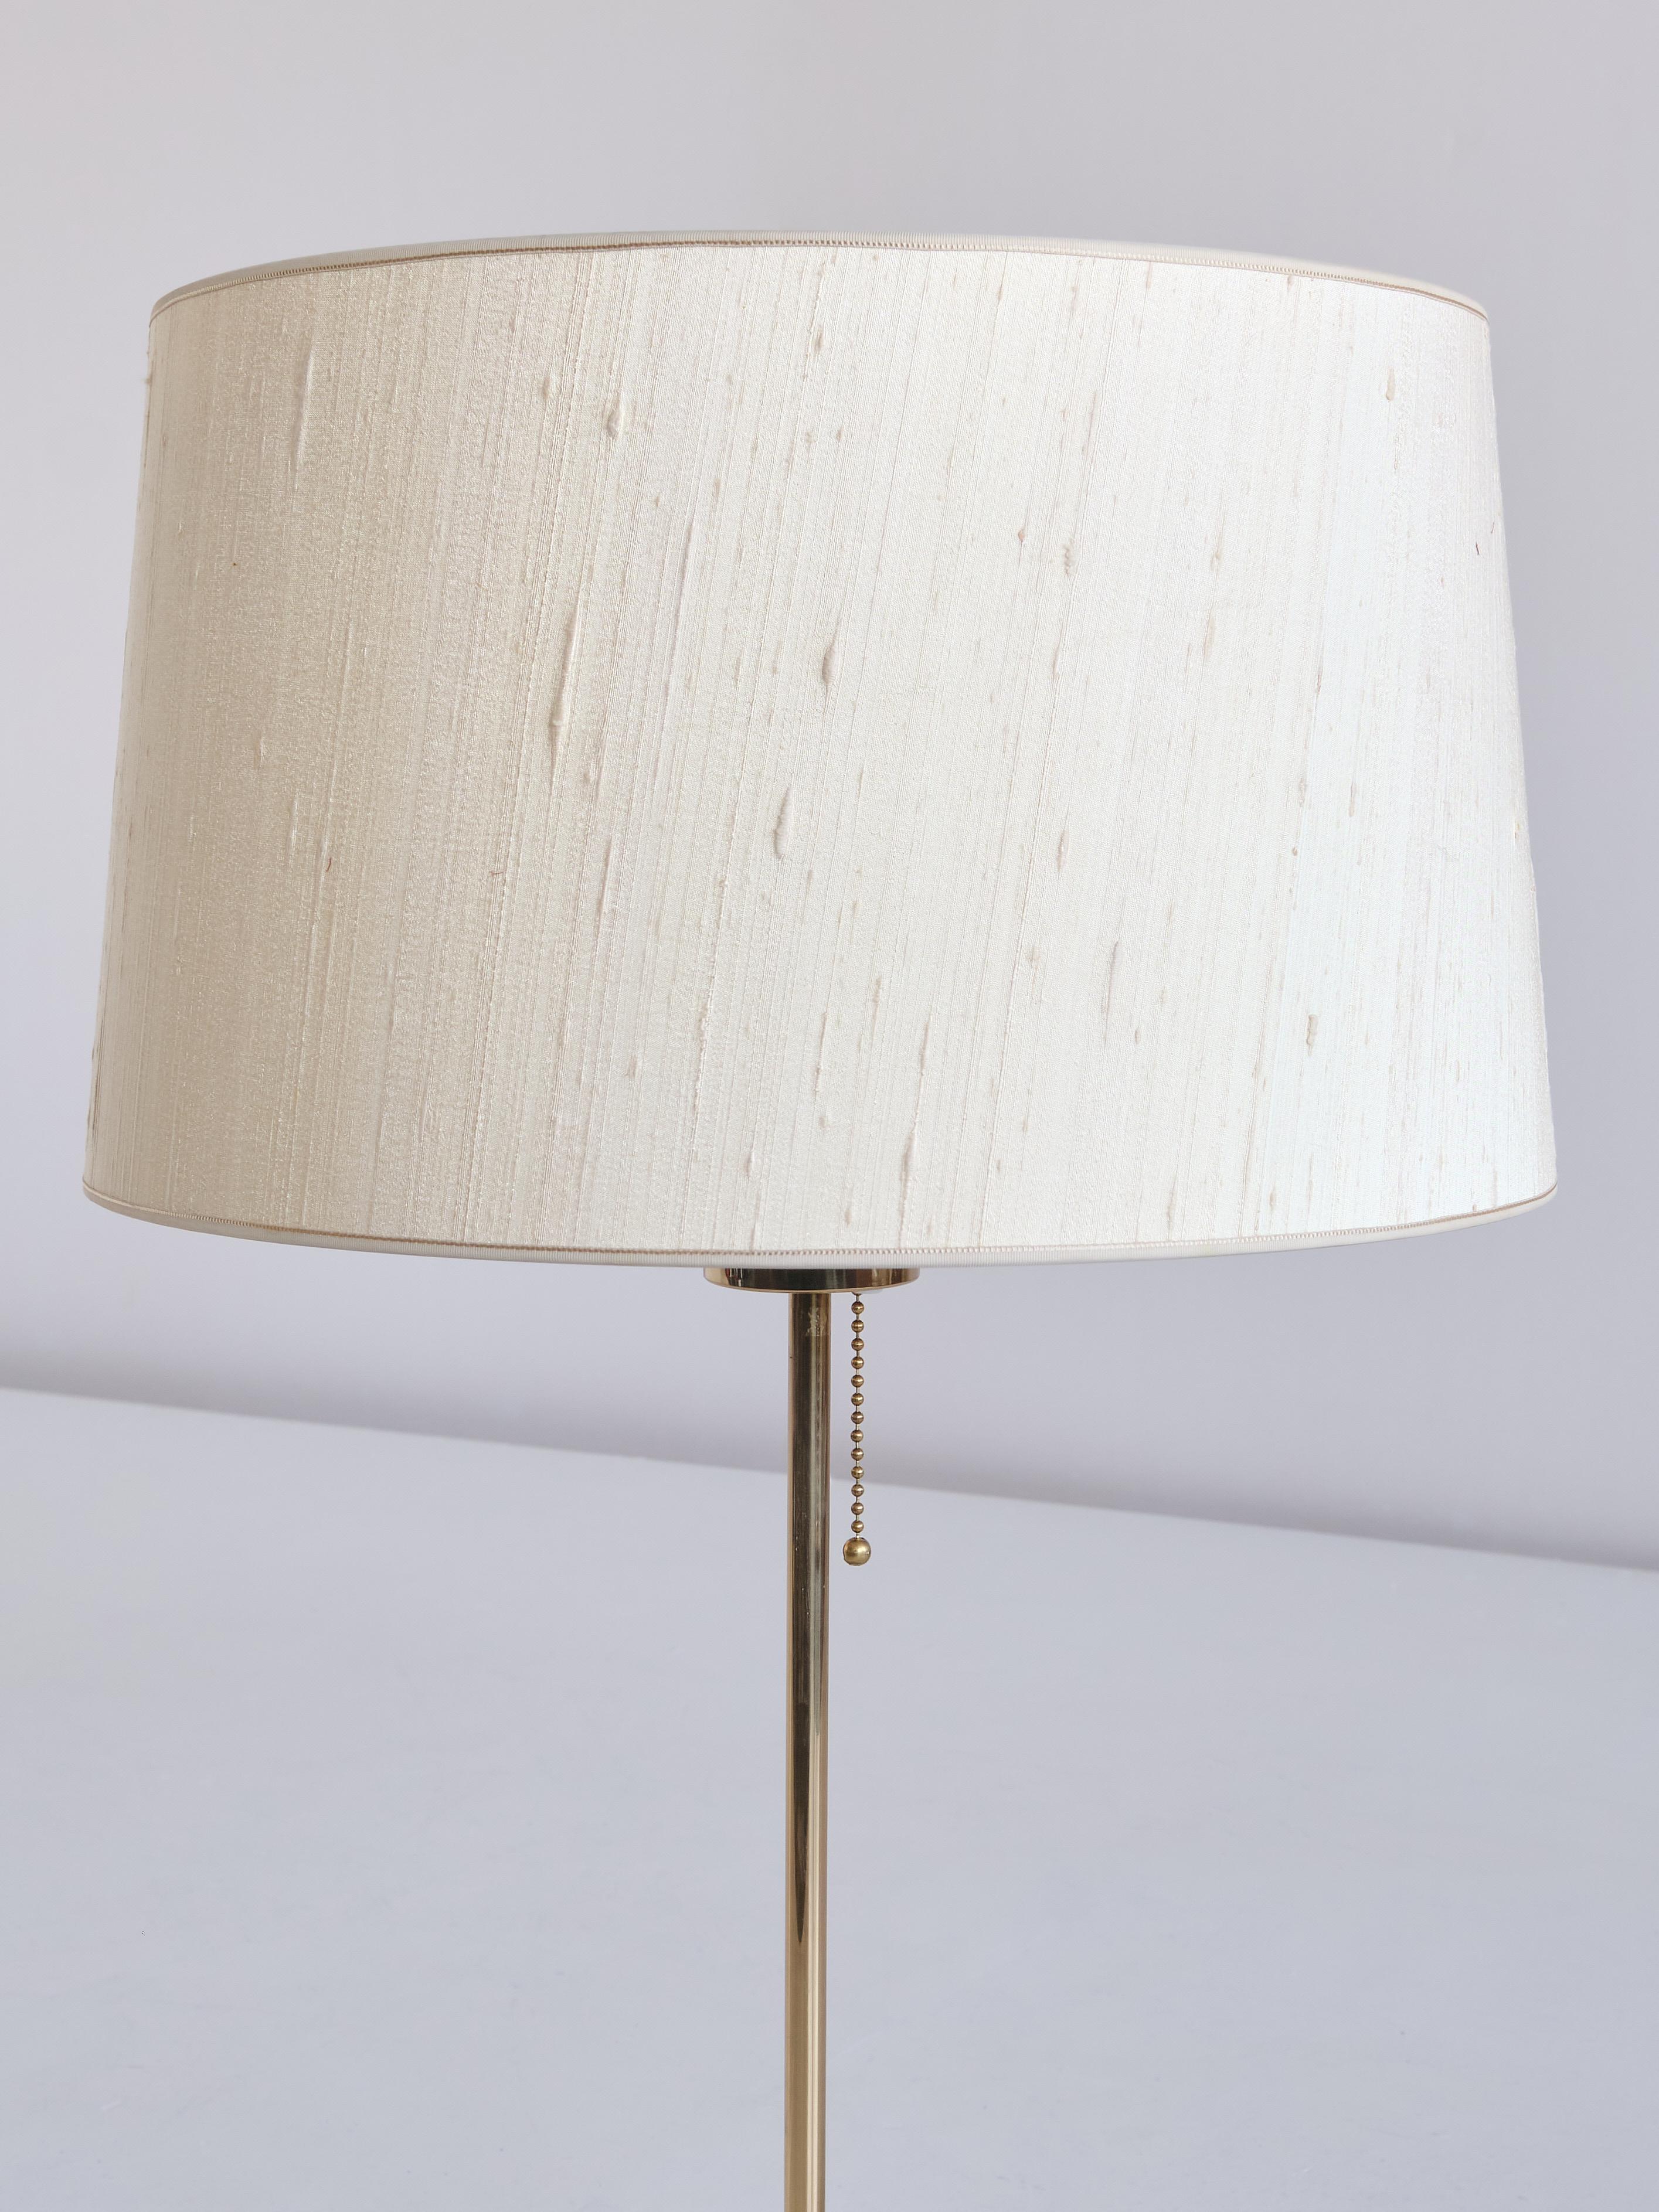 Bergboms B-024 Brass Table Lamp with Beige Silk Shade, Sweden, 1960s For Sale 3